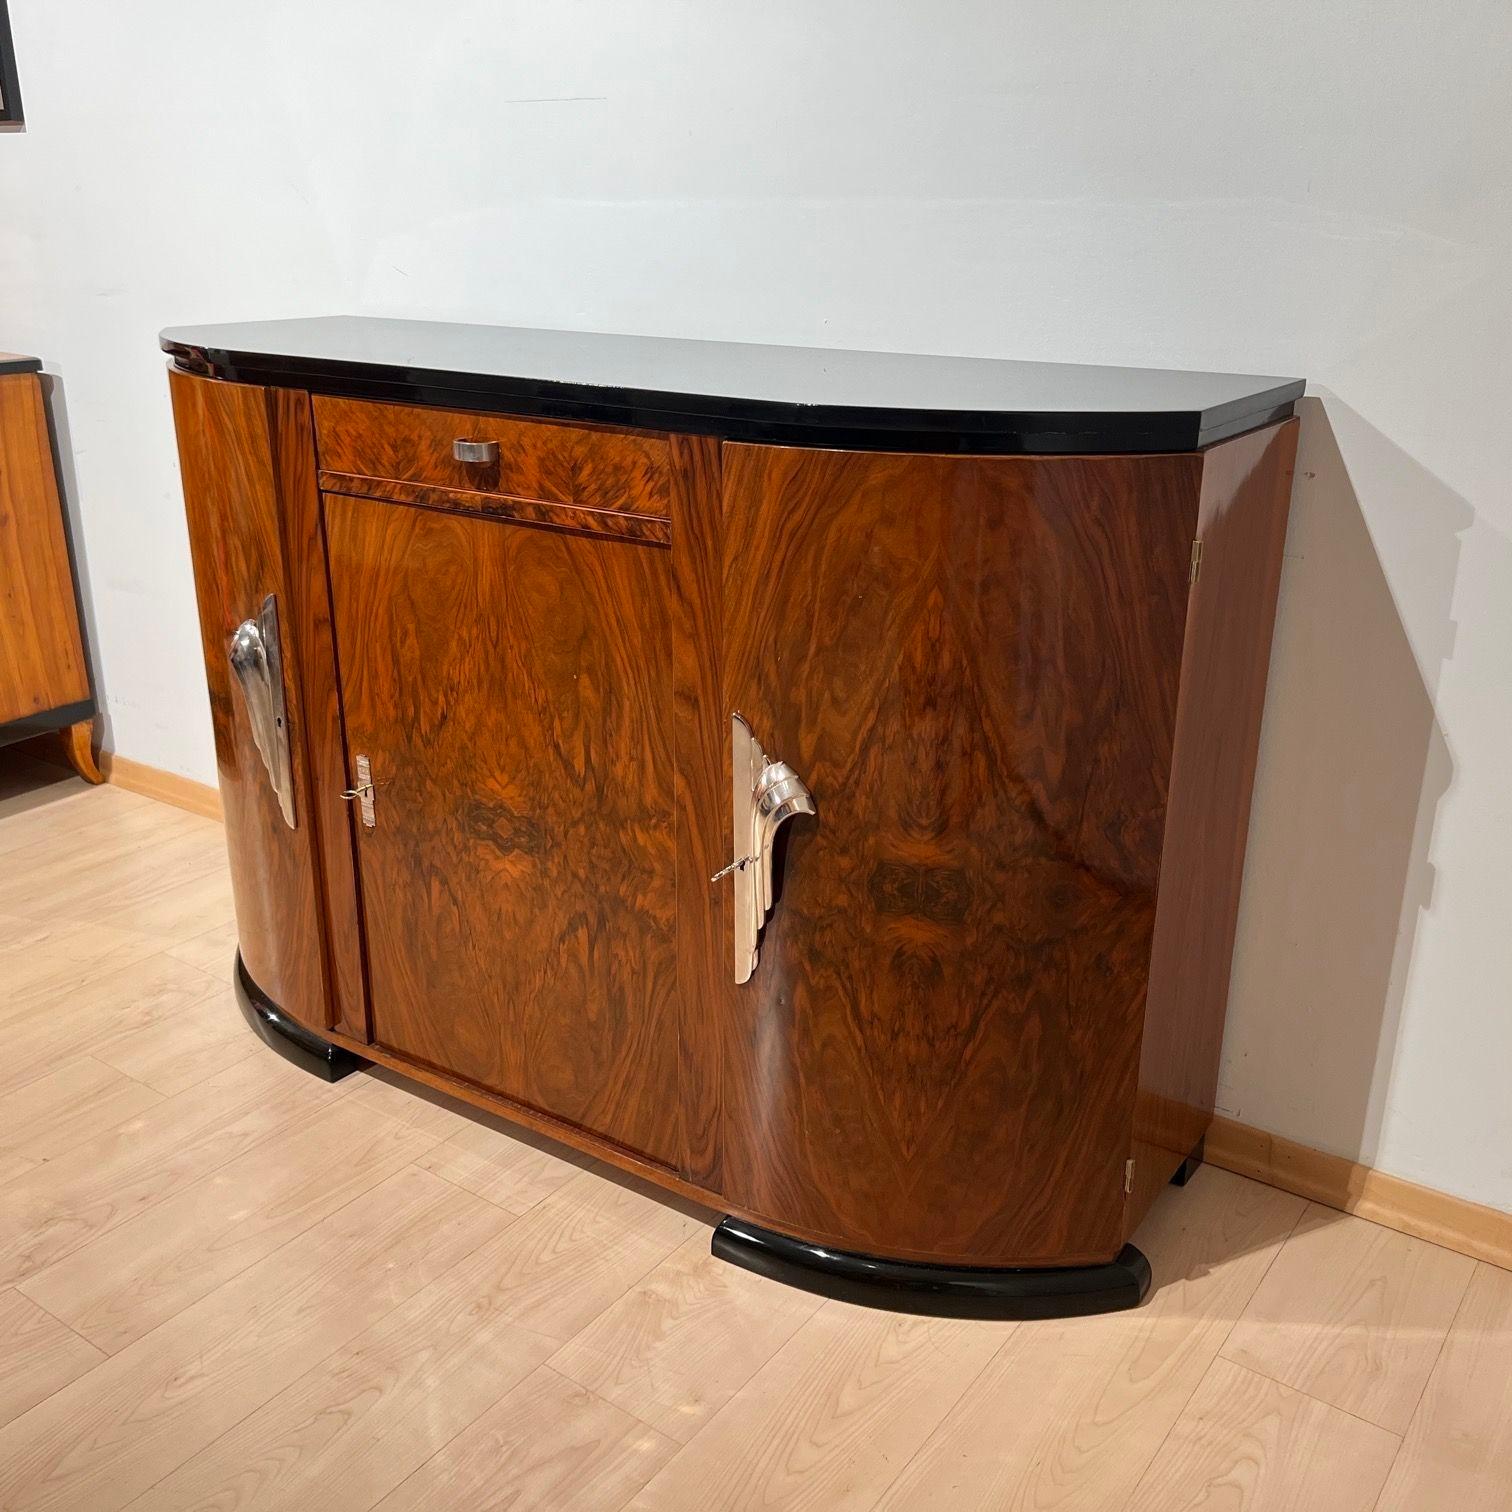 Small Art Deco Sideboard or buffet with curved front from France around 1930.
Beautifully grained walnut veneer, shellac hand-polished.
Nickel plated bronze fittings and key escutcheon. Ebonized legs and top rim as well as black high-gloss lacquered